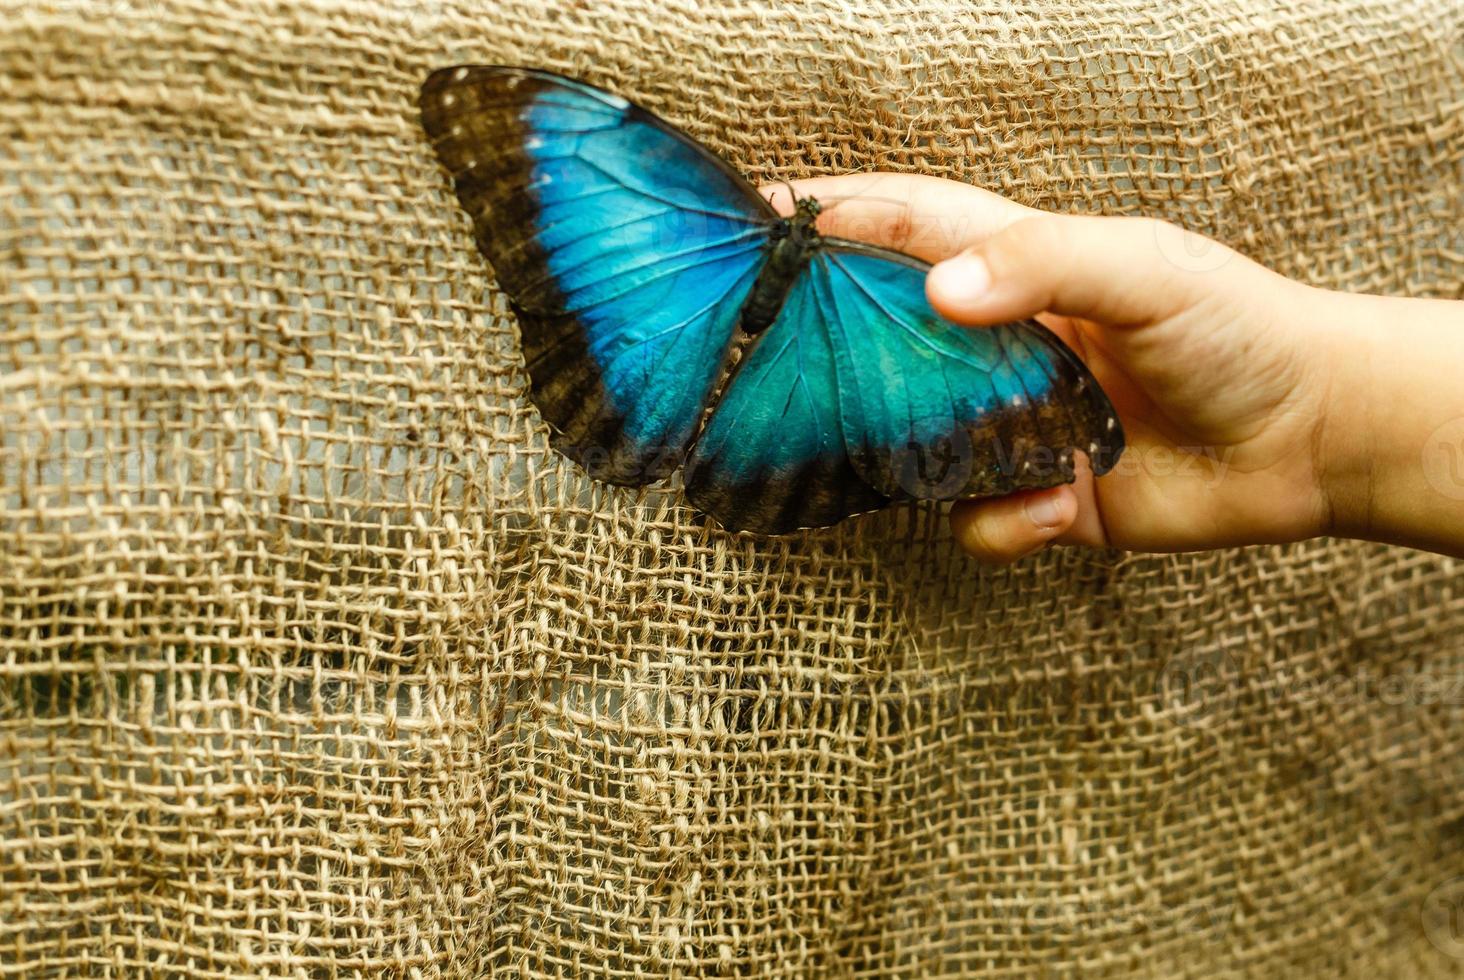 Hands holding a blue butterfly against background photo